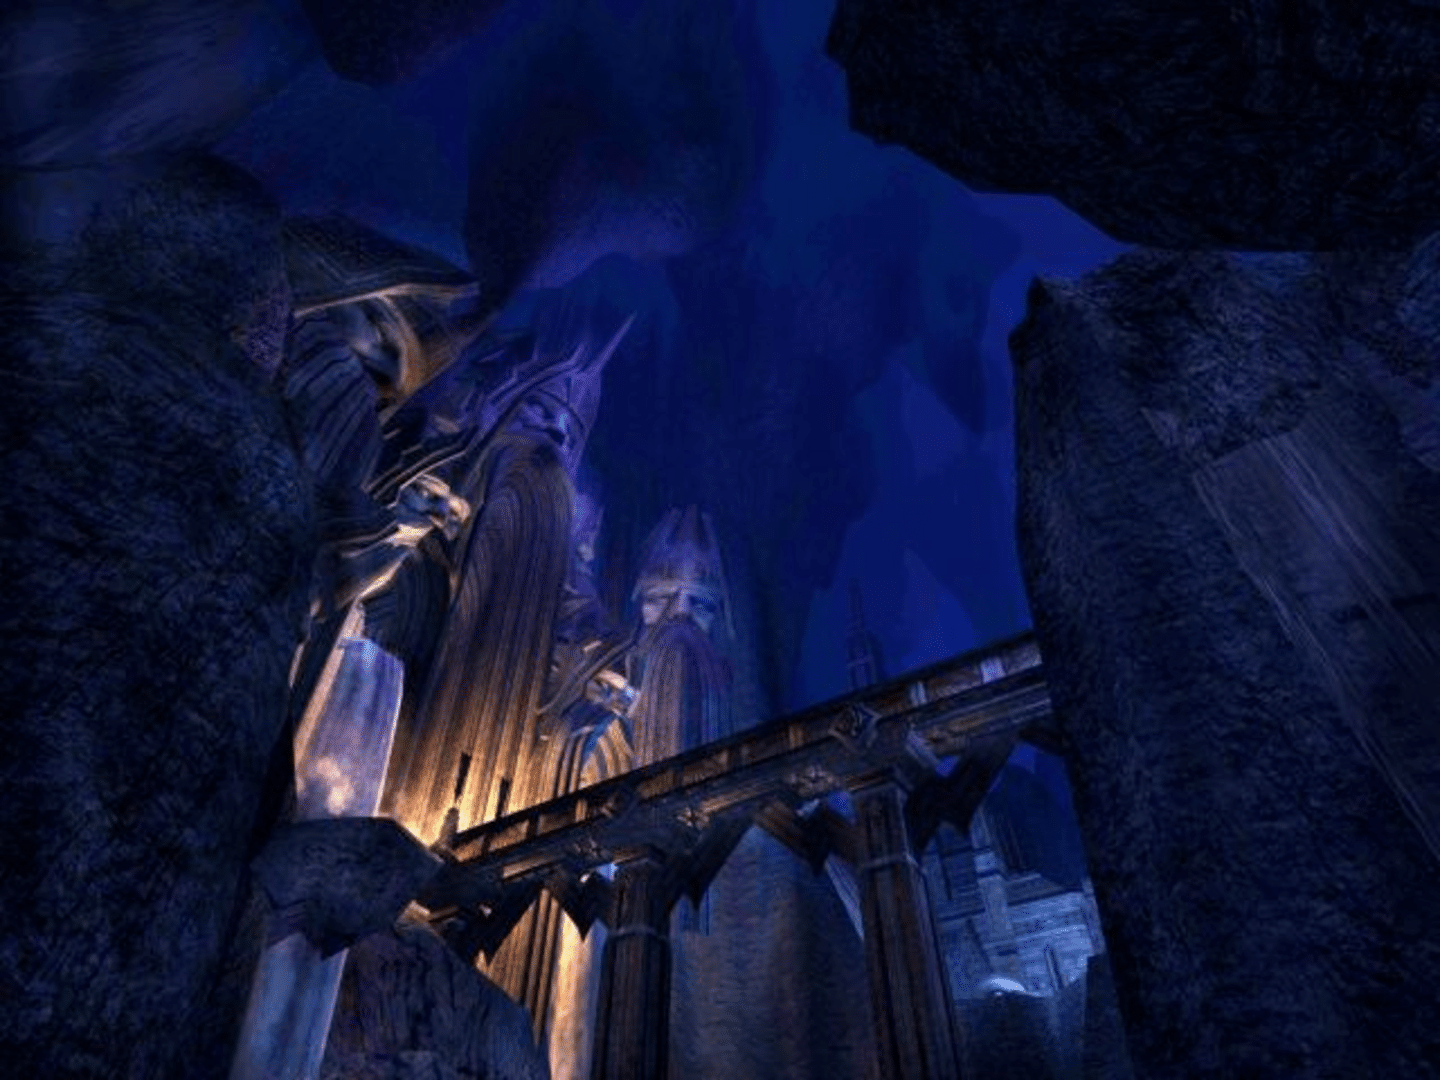 The Lord of the Rings Online: Mines of Moria screenshot